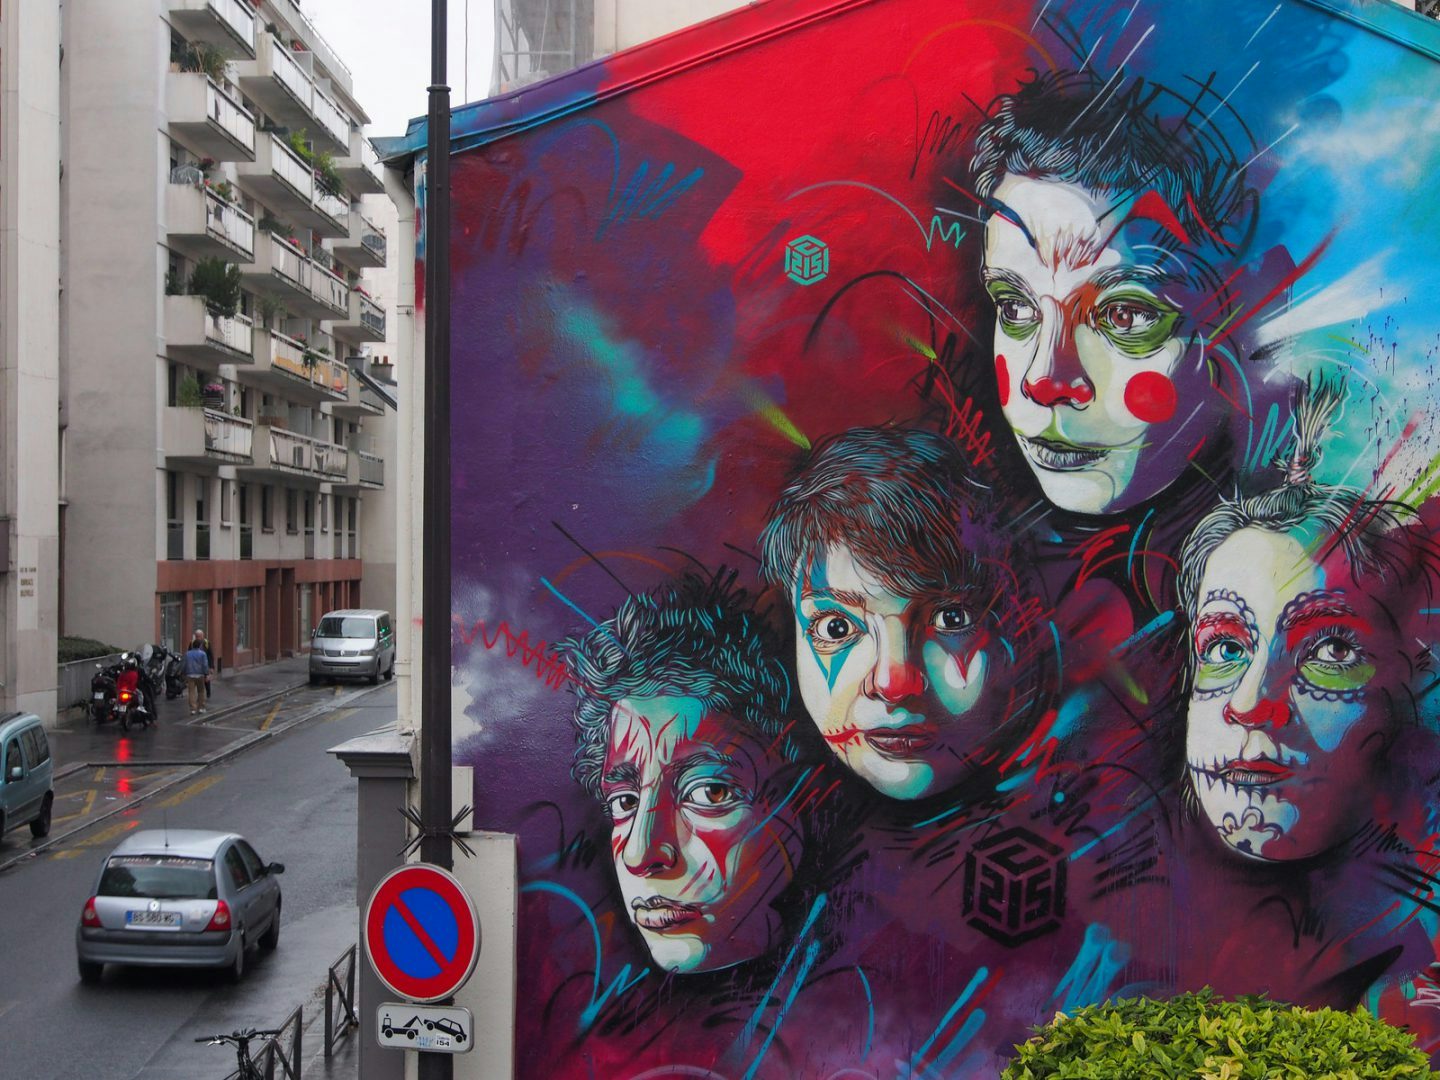 Catching up with C215